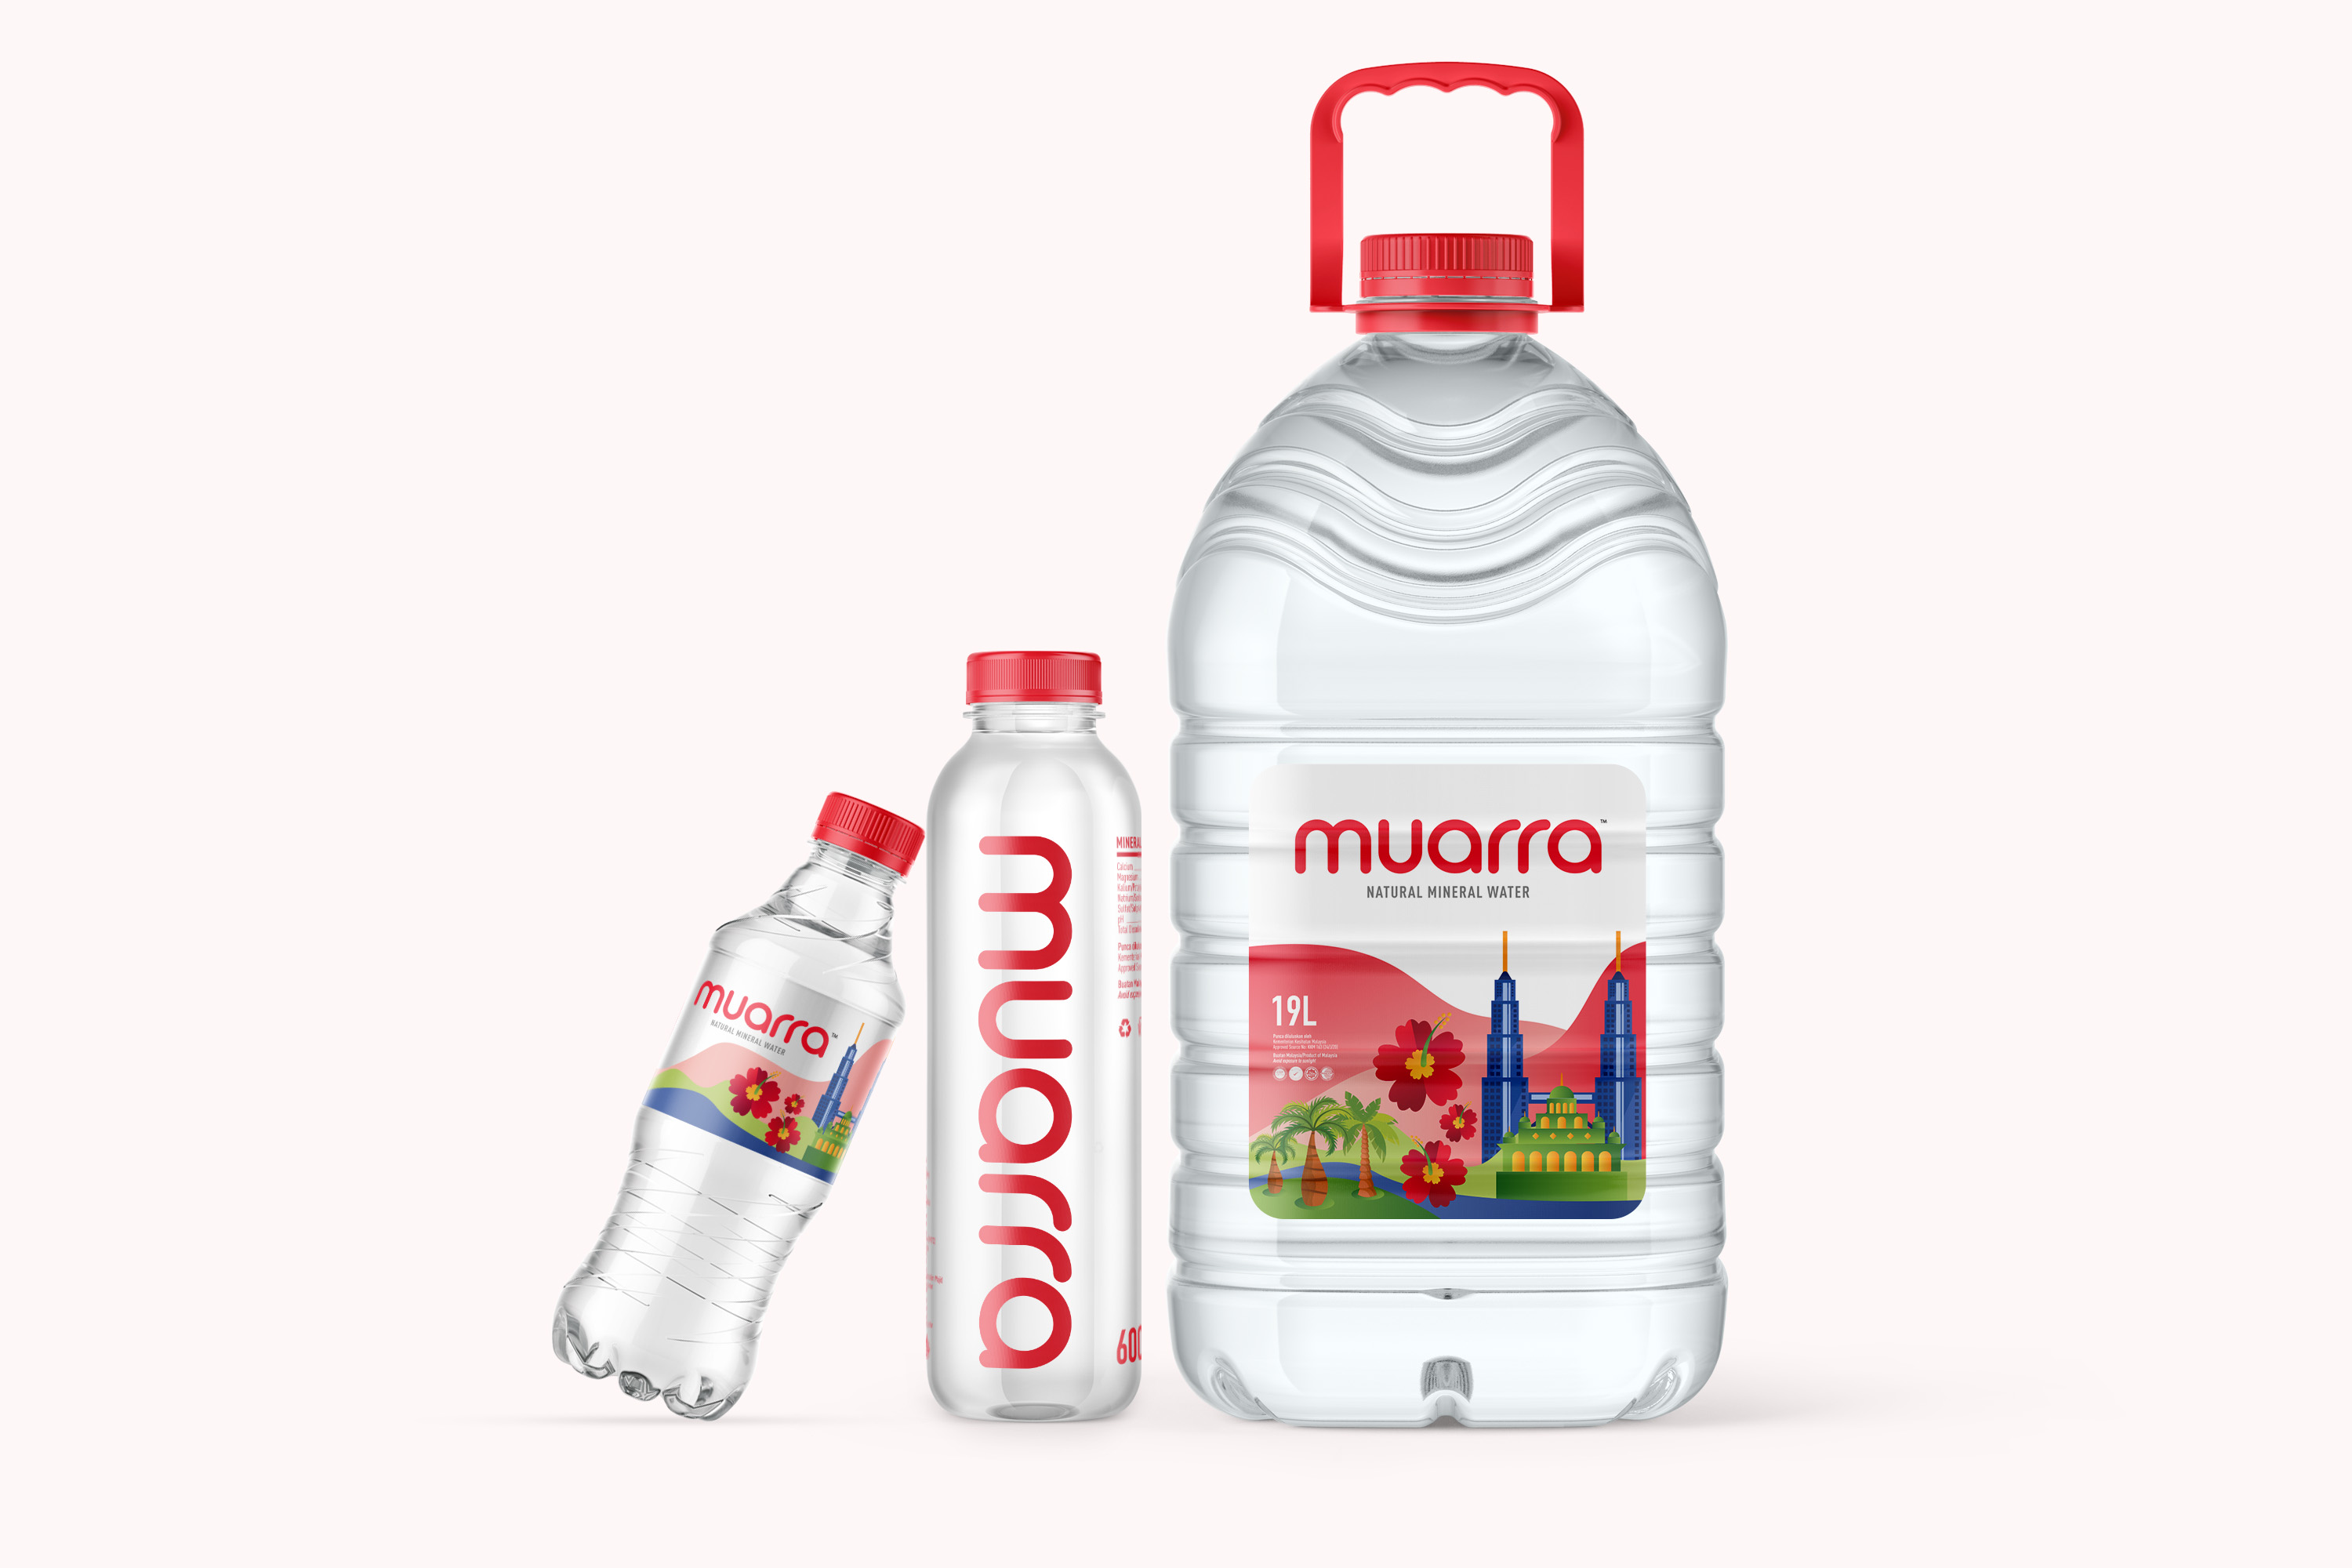 Widarto Impact Created the Brand Identity and Packaging Design for Muarra Mineral Water